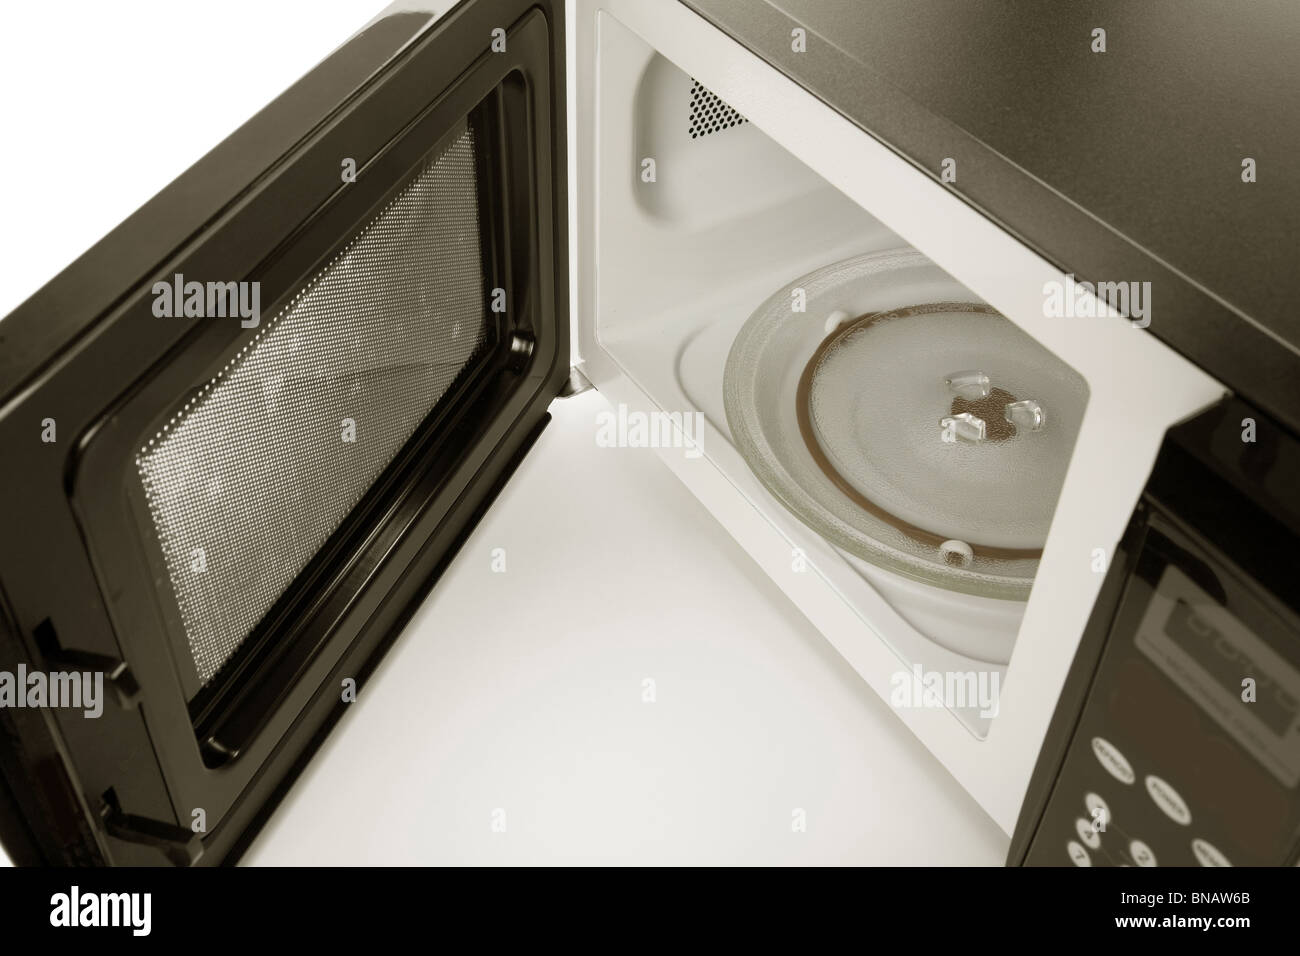 Microwave Oven close up shot Stock Photo